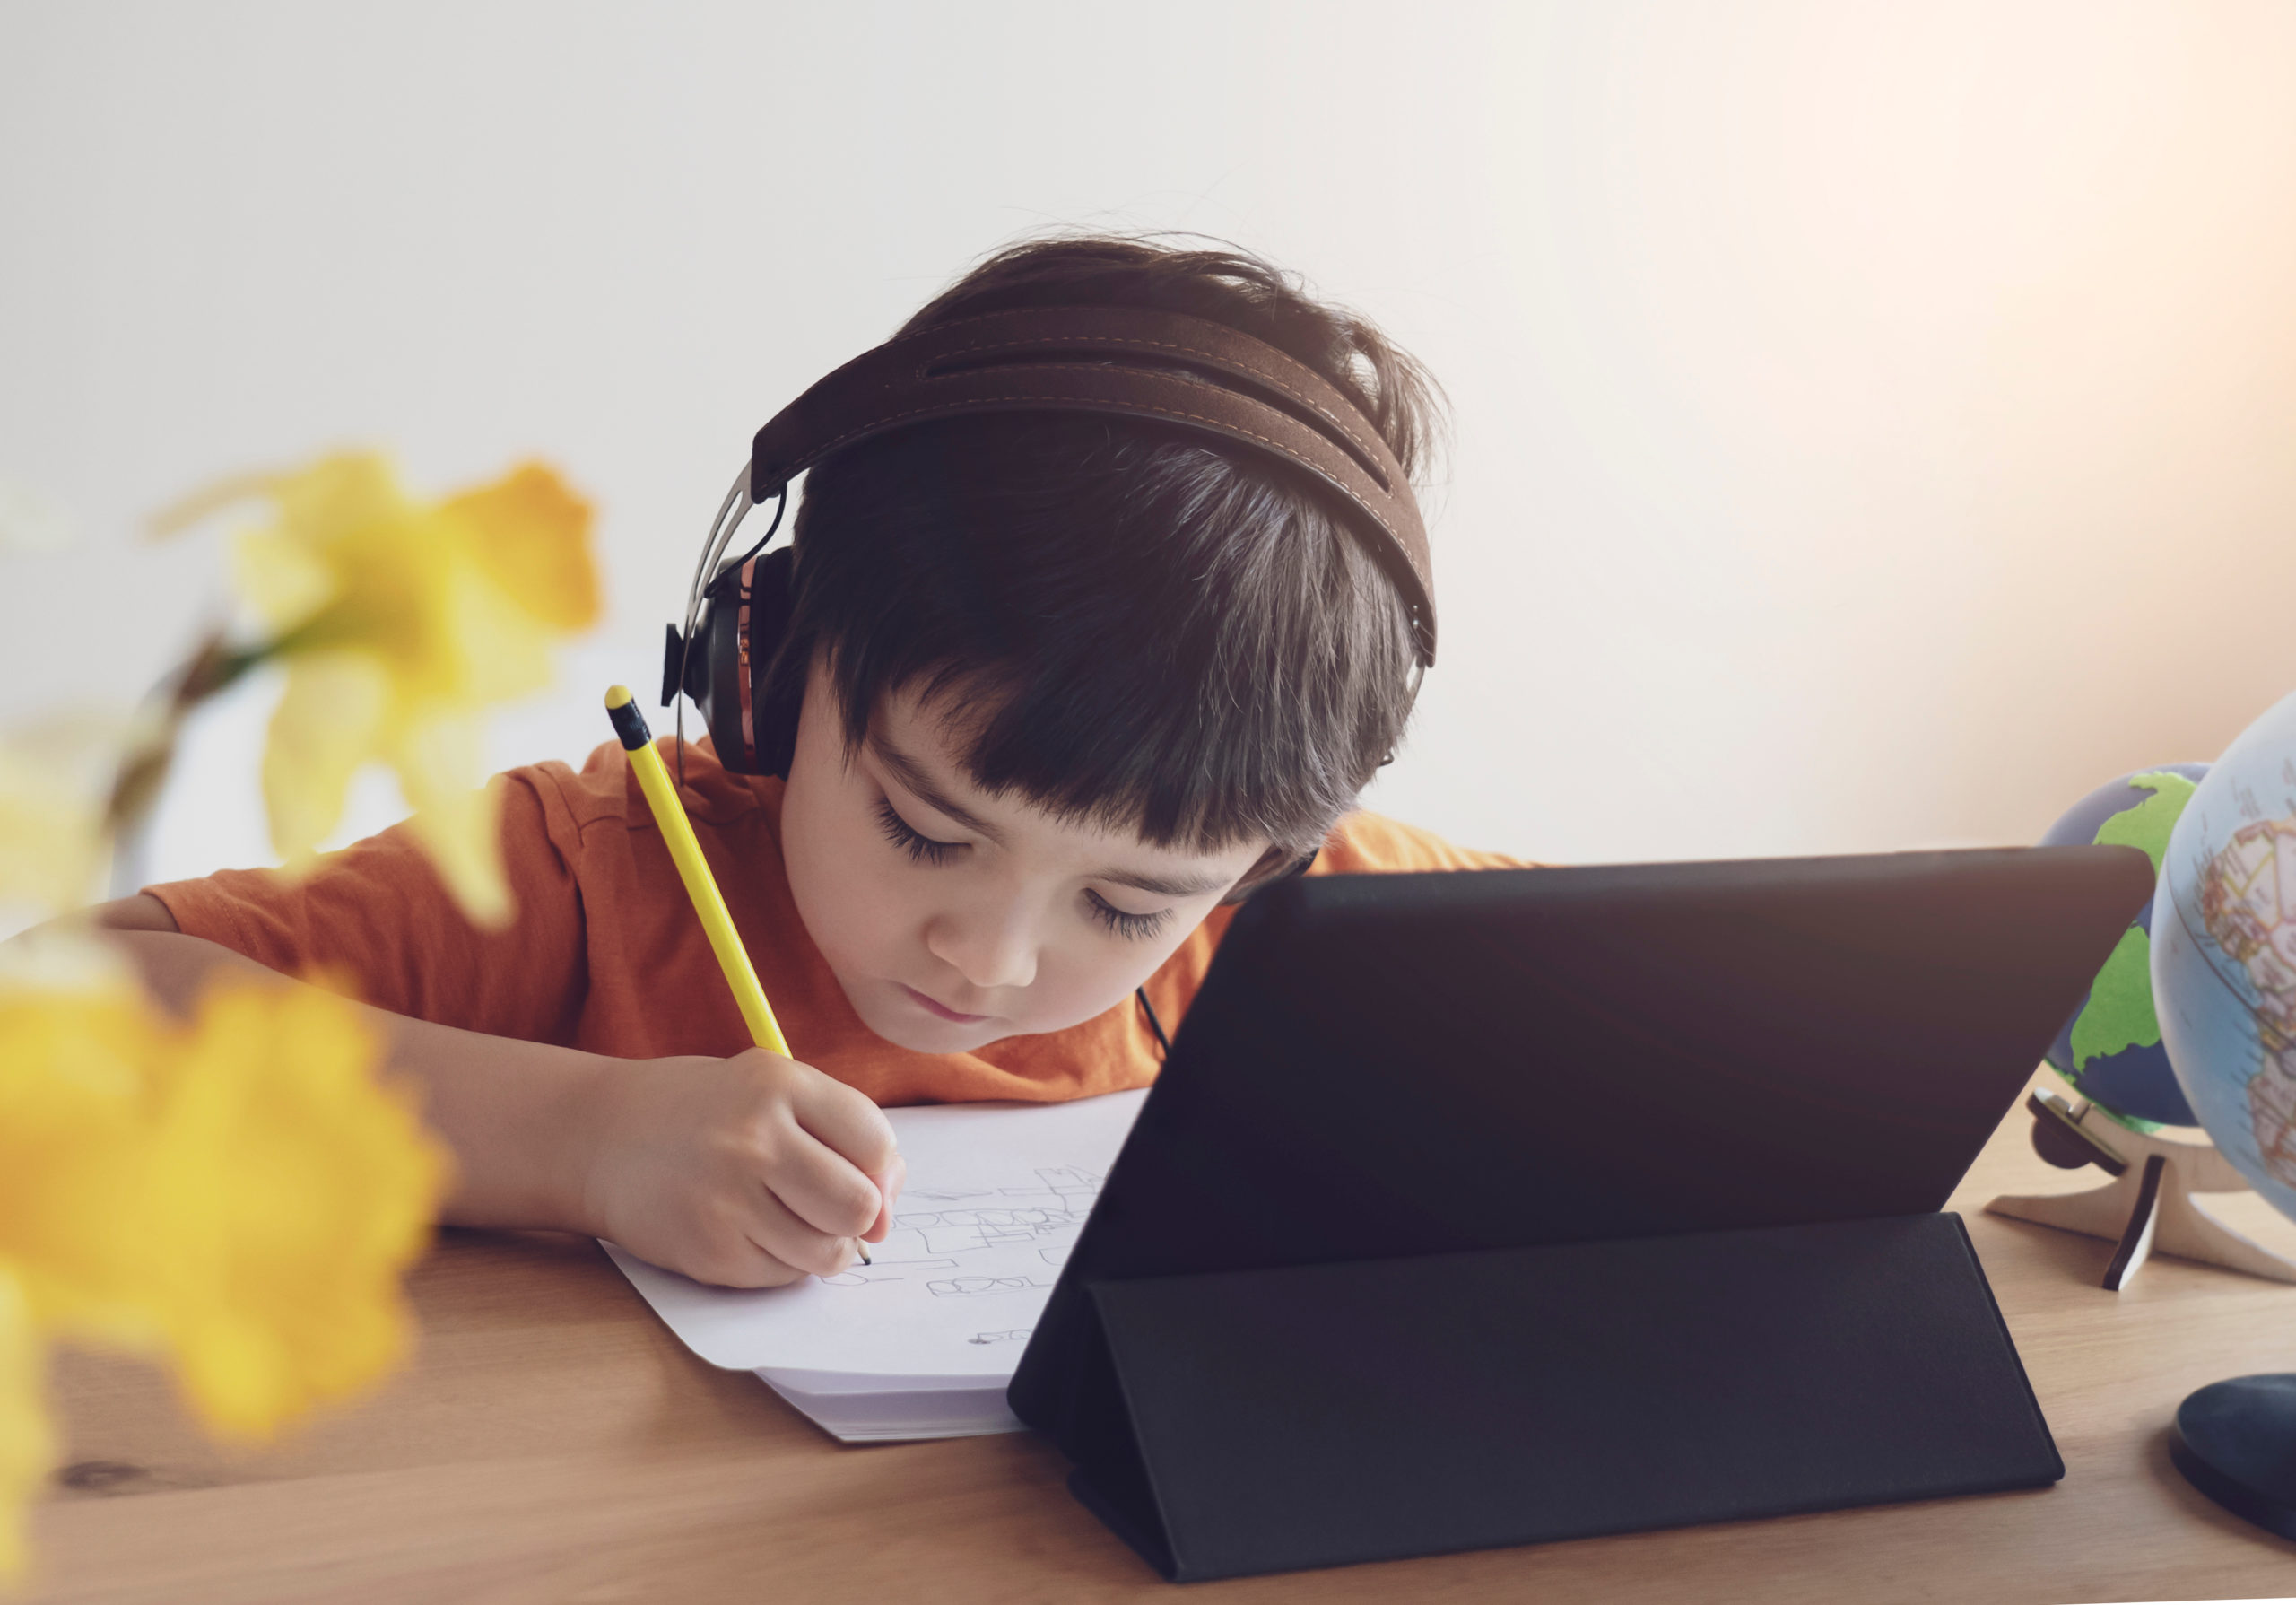 boy at desk with pencil and schoolwork wearing headphones with ipad in front of him